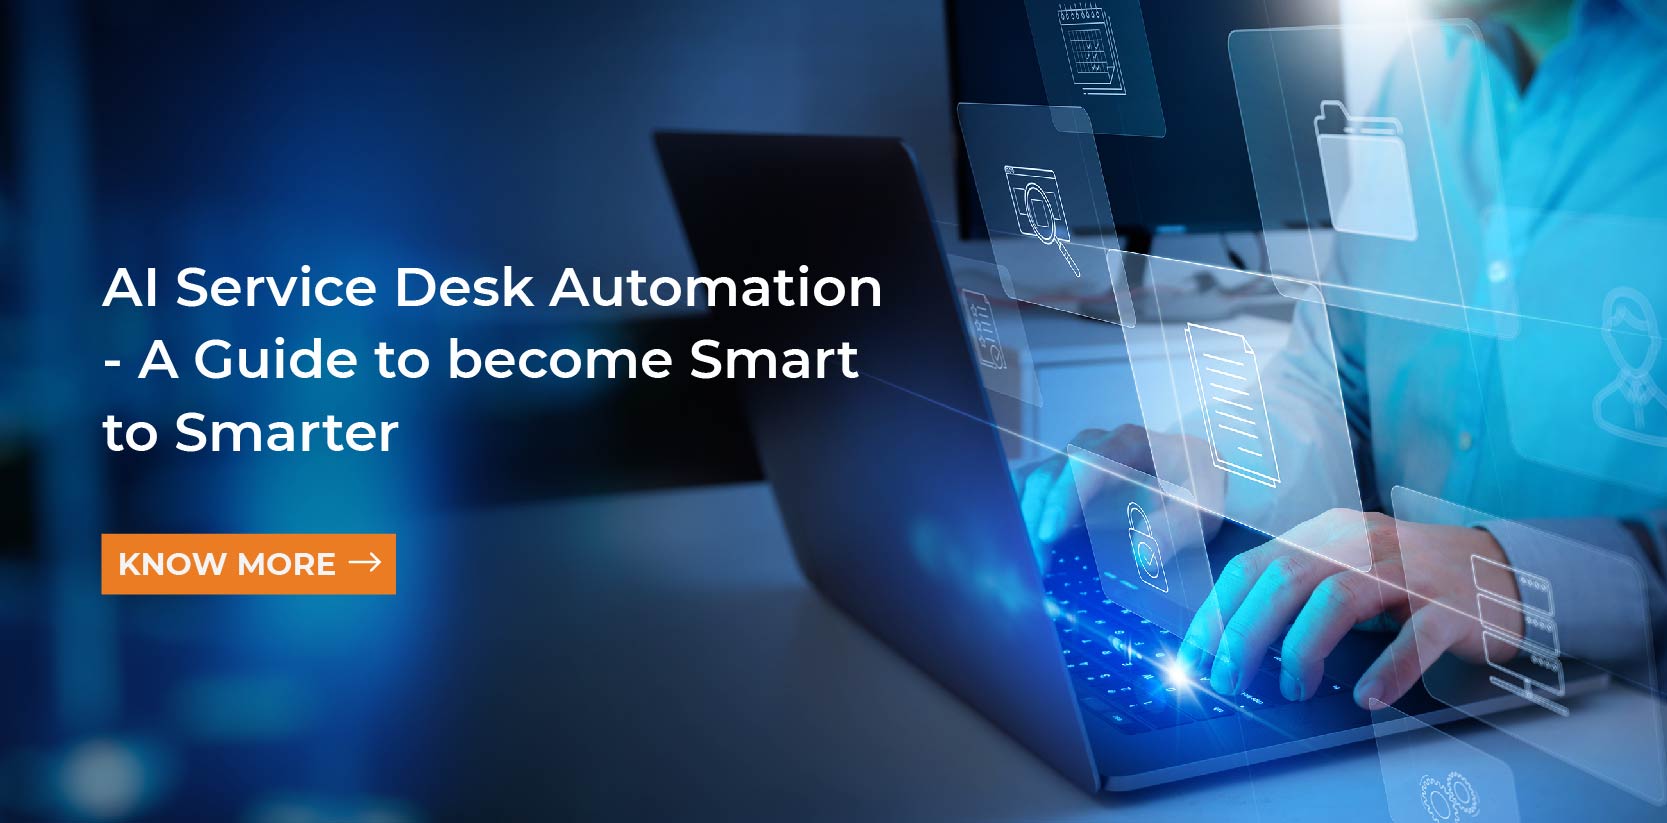 AI Service Desk Automation- A Guide to become Smart to Smarter